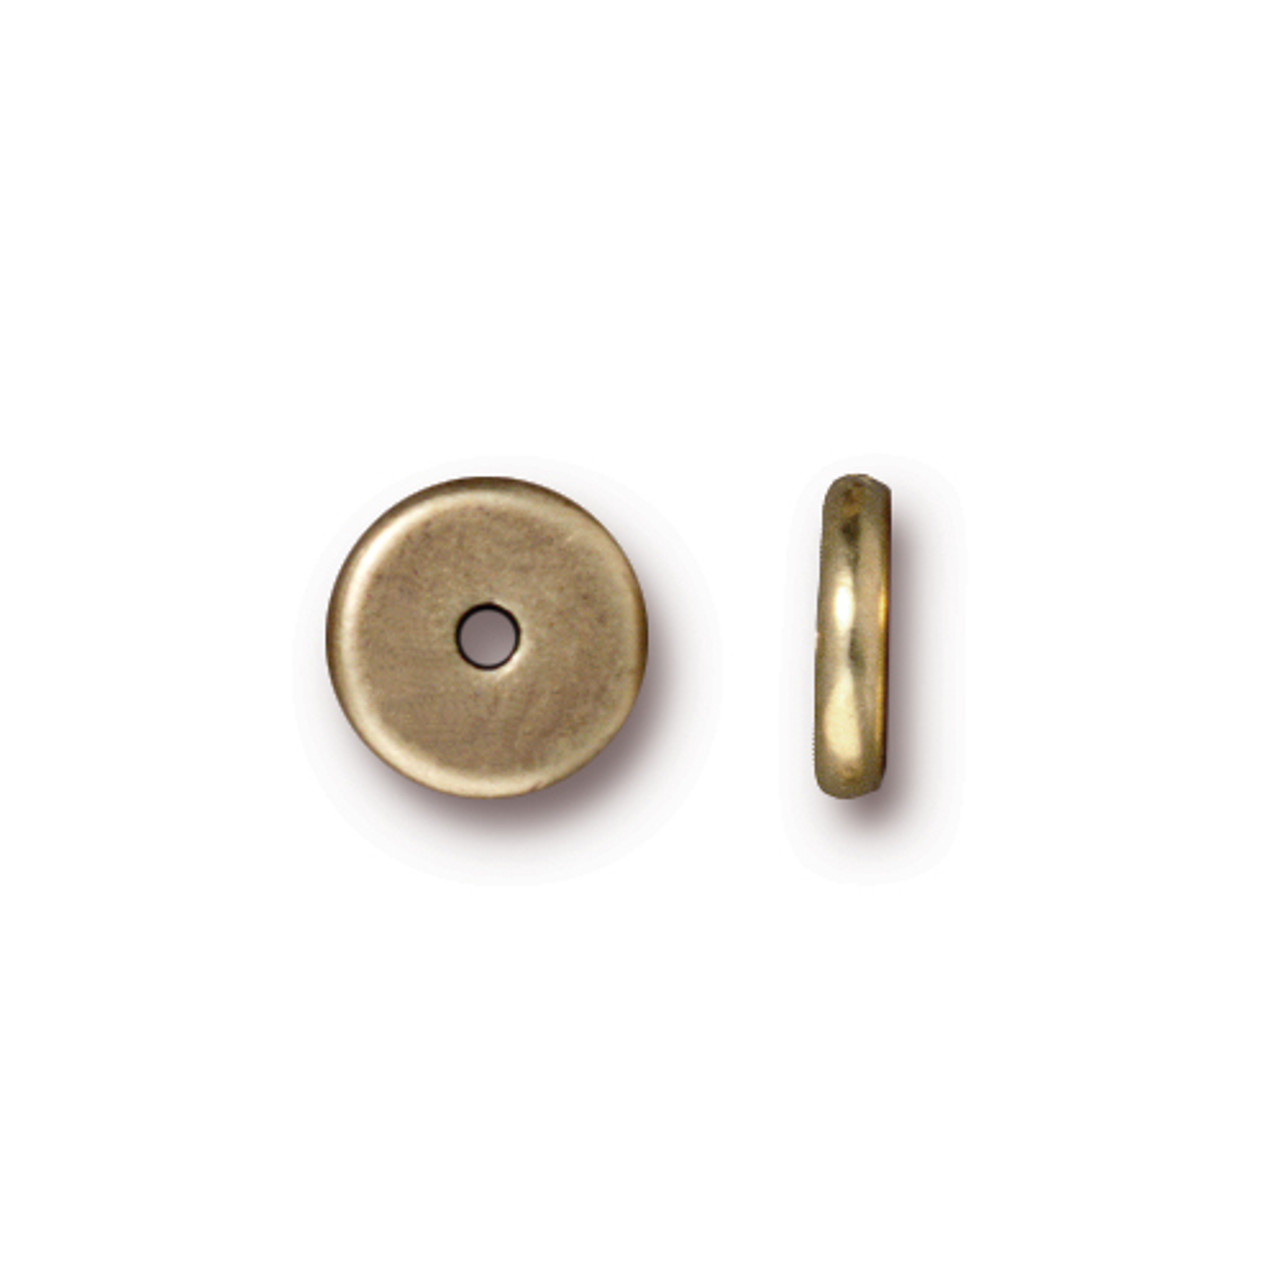 Disk 8mm Spacer Bead, Oxidized Brass Plate, 100 per Pack - TierraCast, Inc.